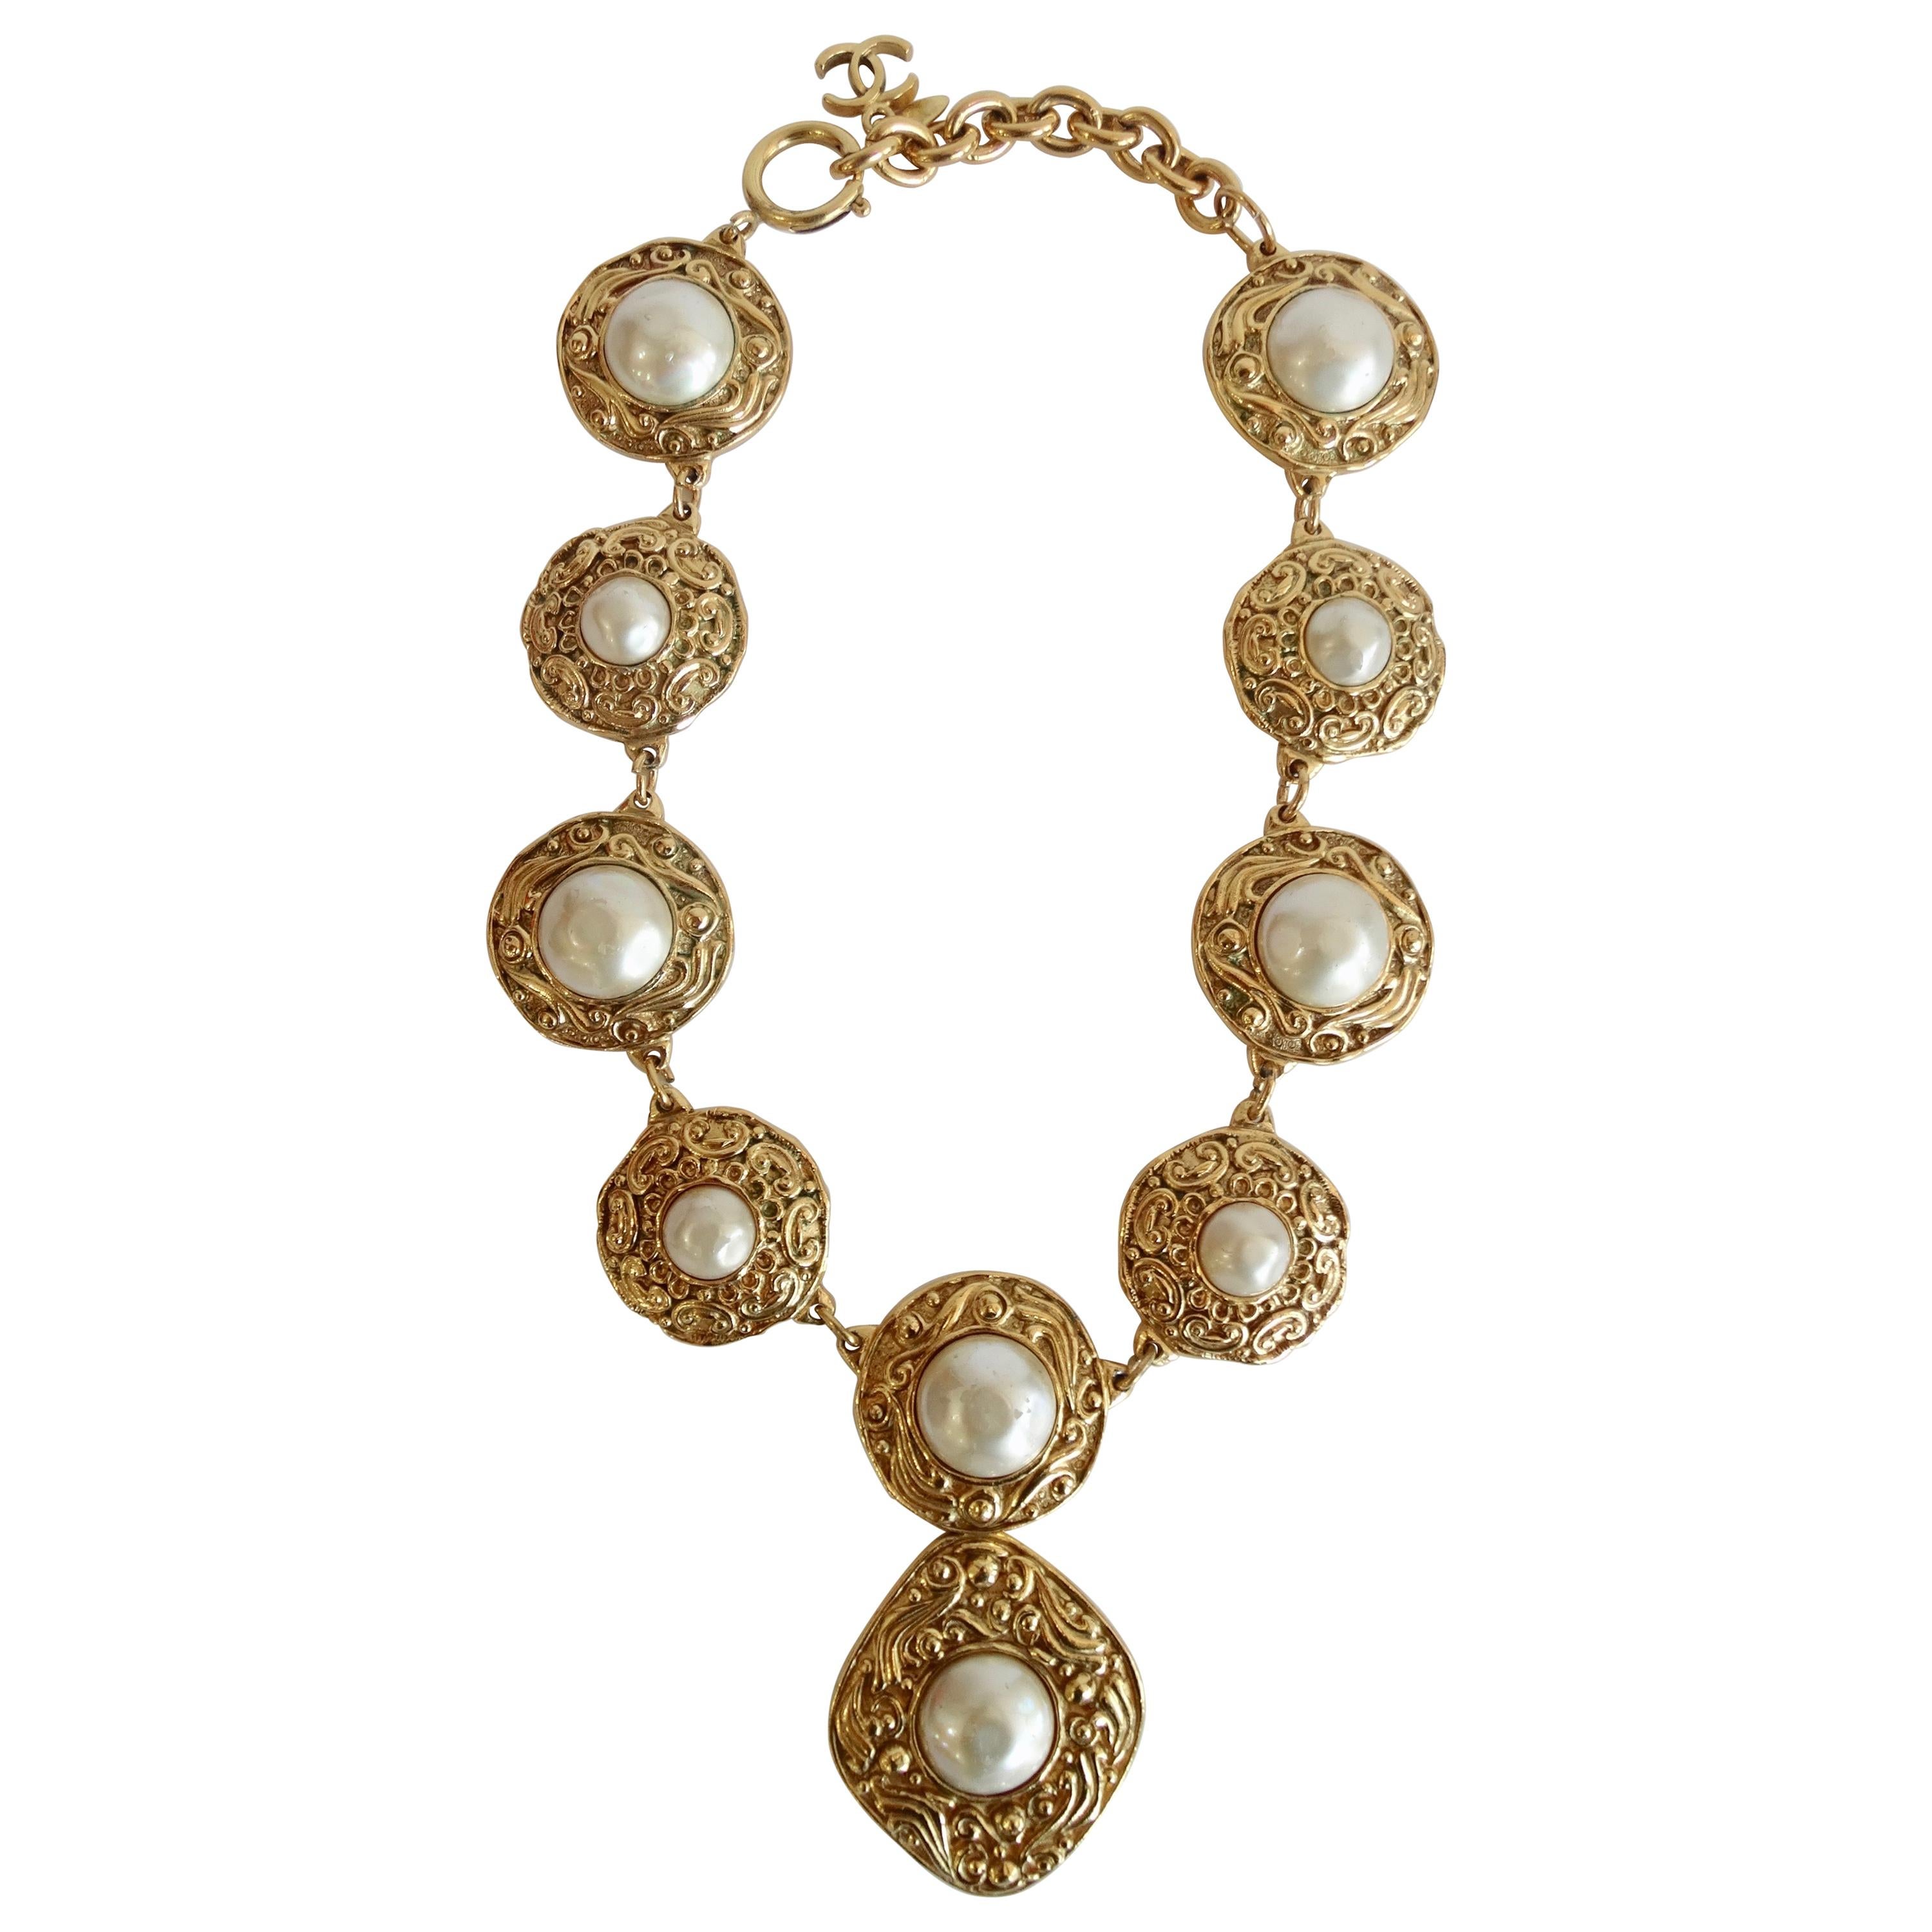 Chanel 1980s Pearl Statement Pendant Necklace 